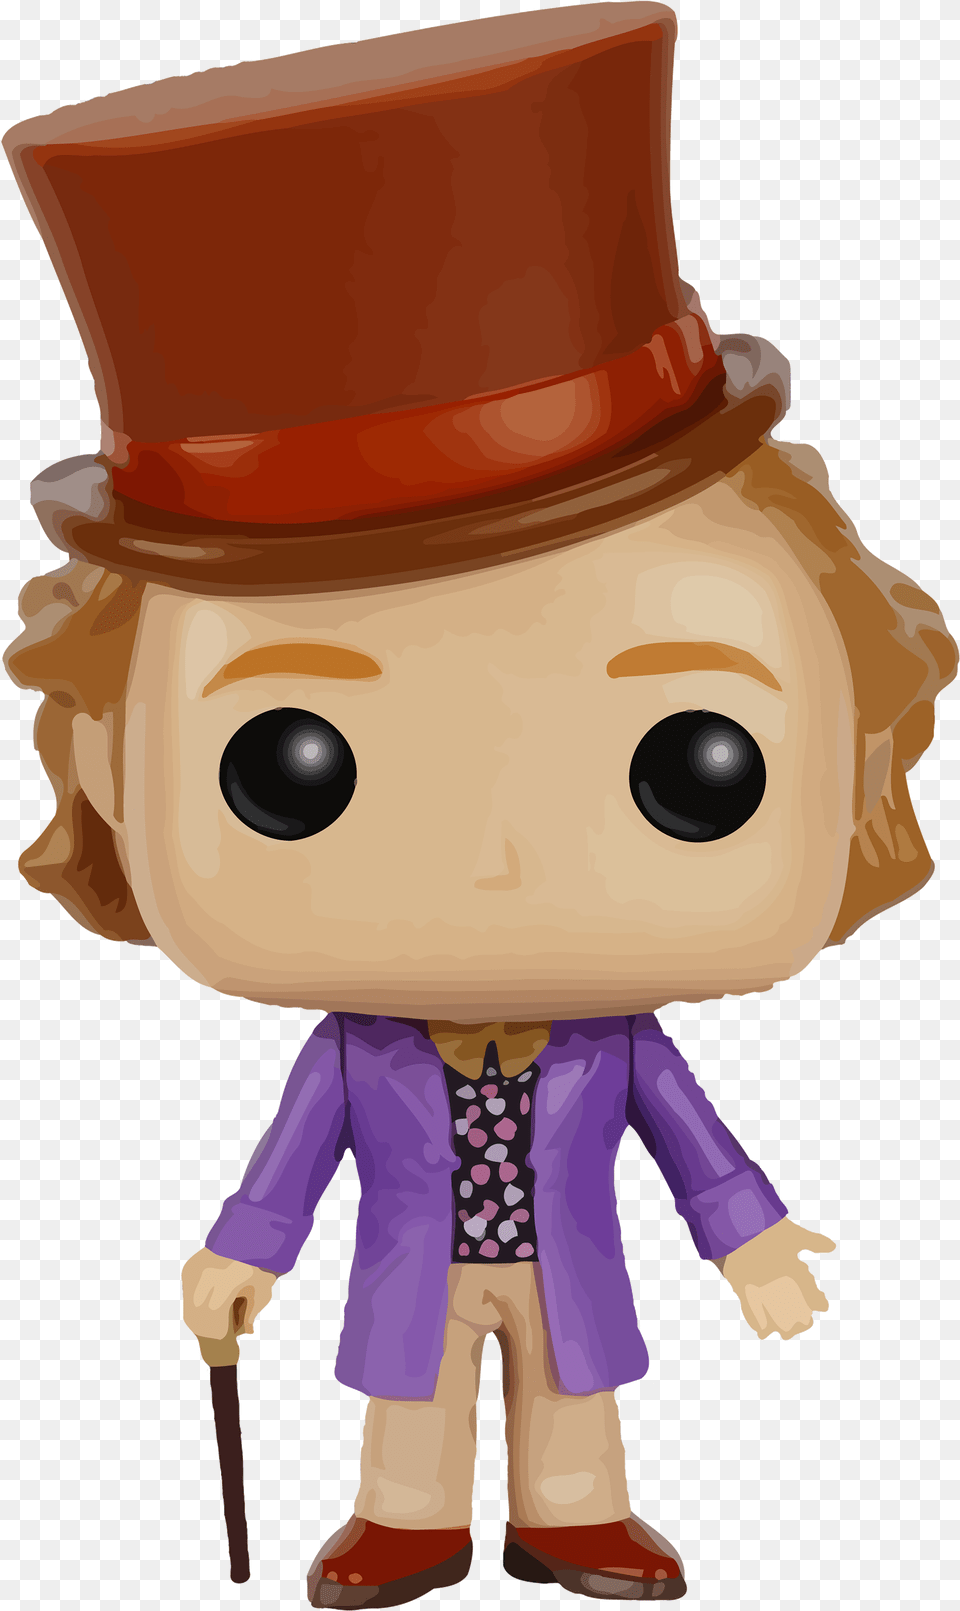 Willy Wonka Charlie And The Chocolate Factory Violet Funko Pop Willy Wonka, Baby, Person, Nutcracker, Face Png